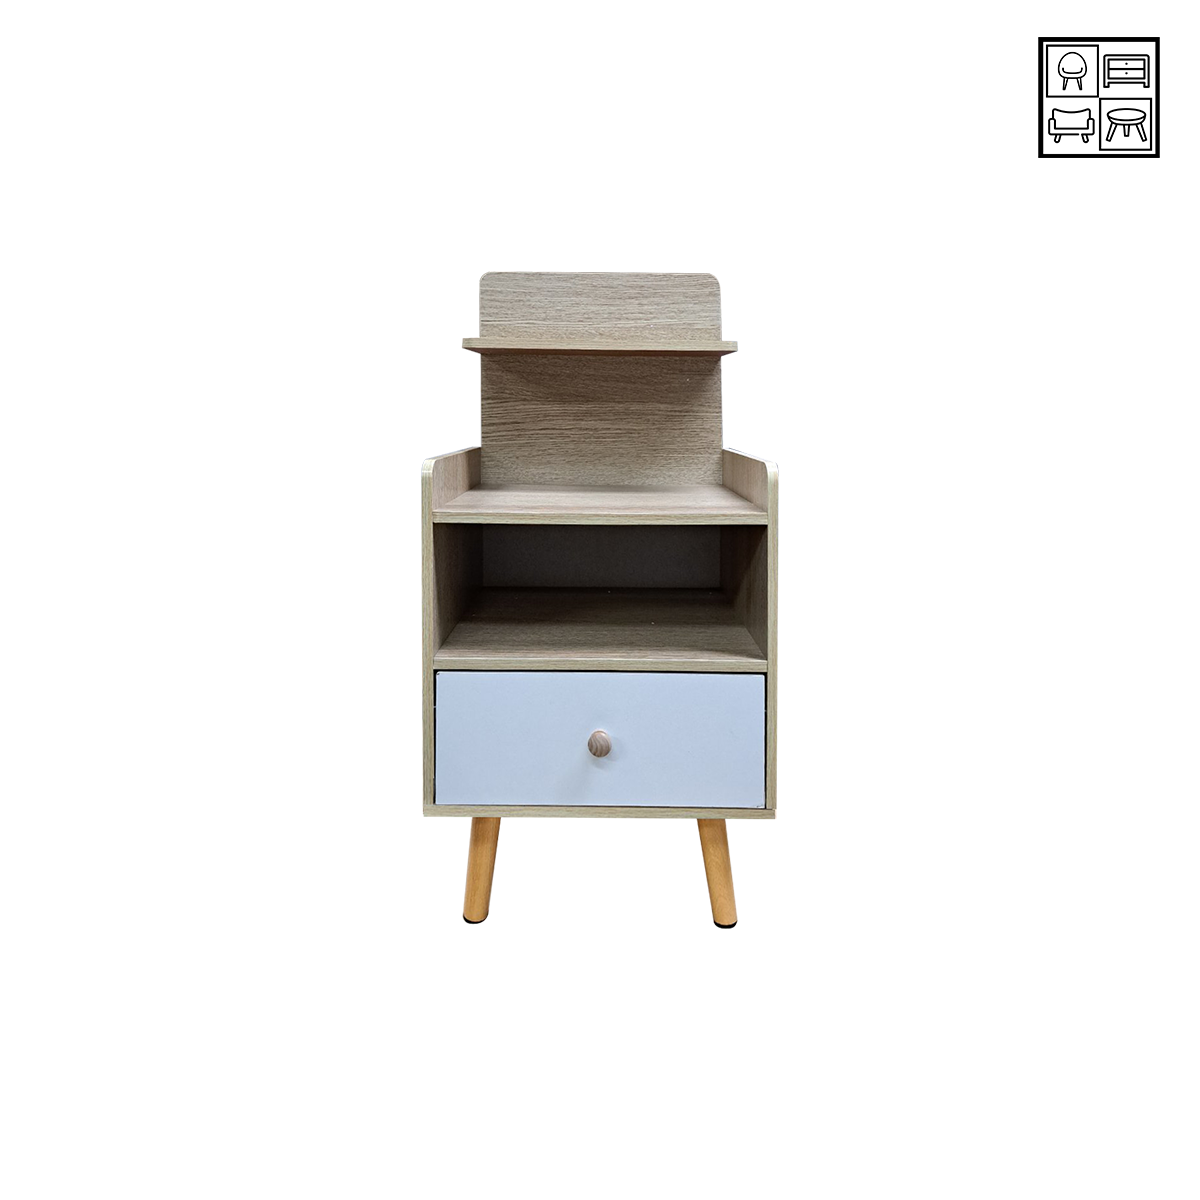 Zion Bedside Table